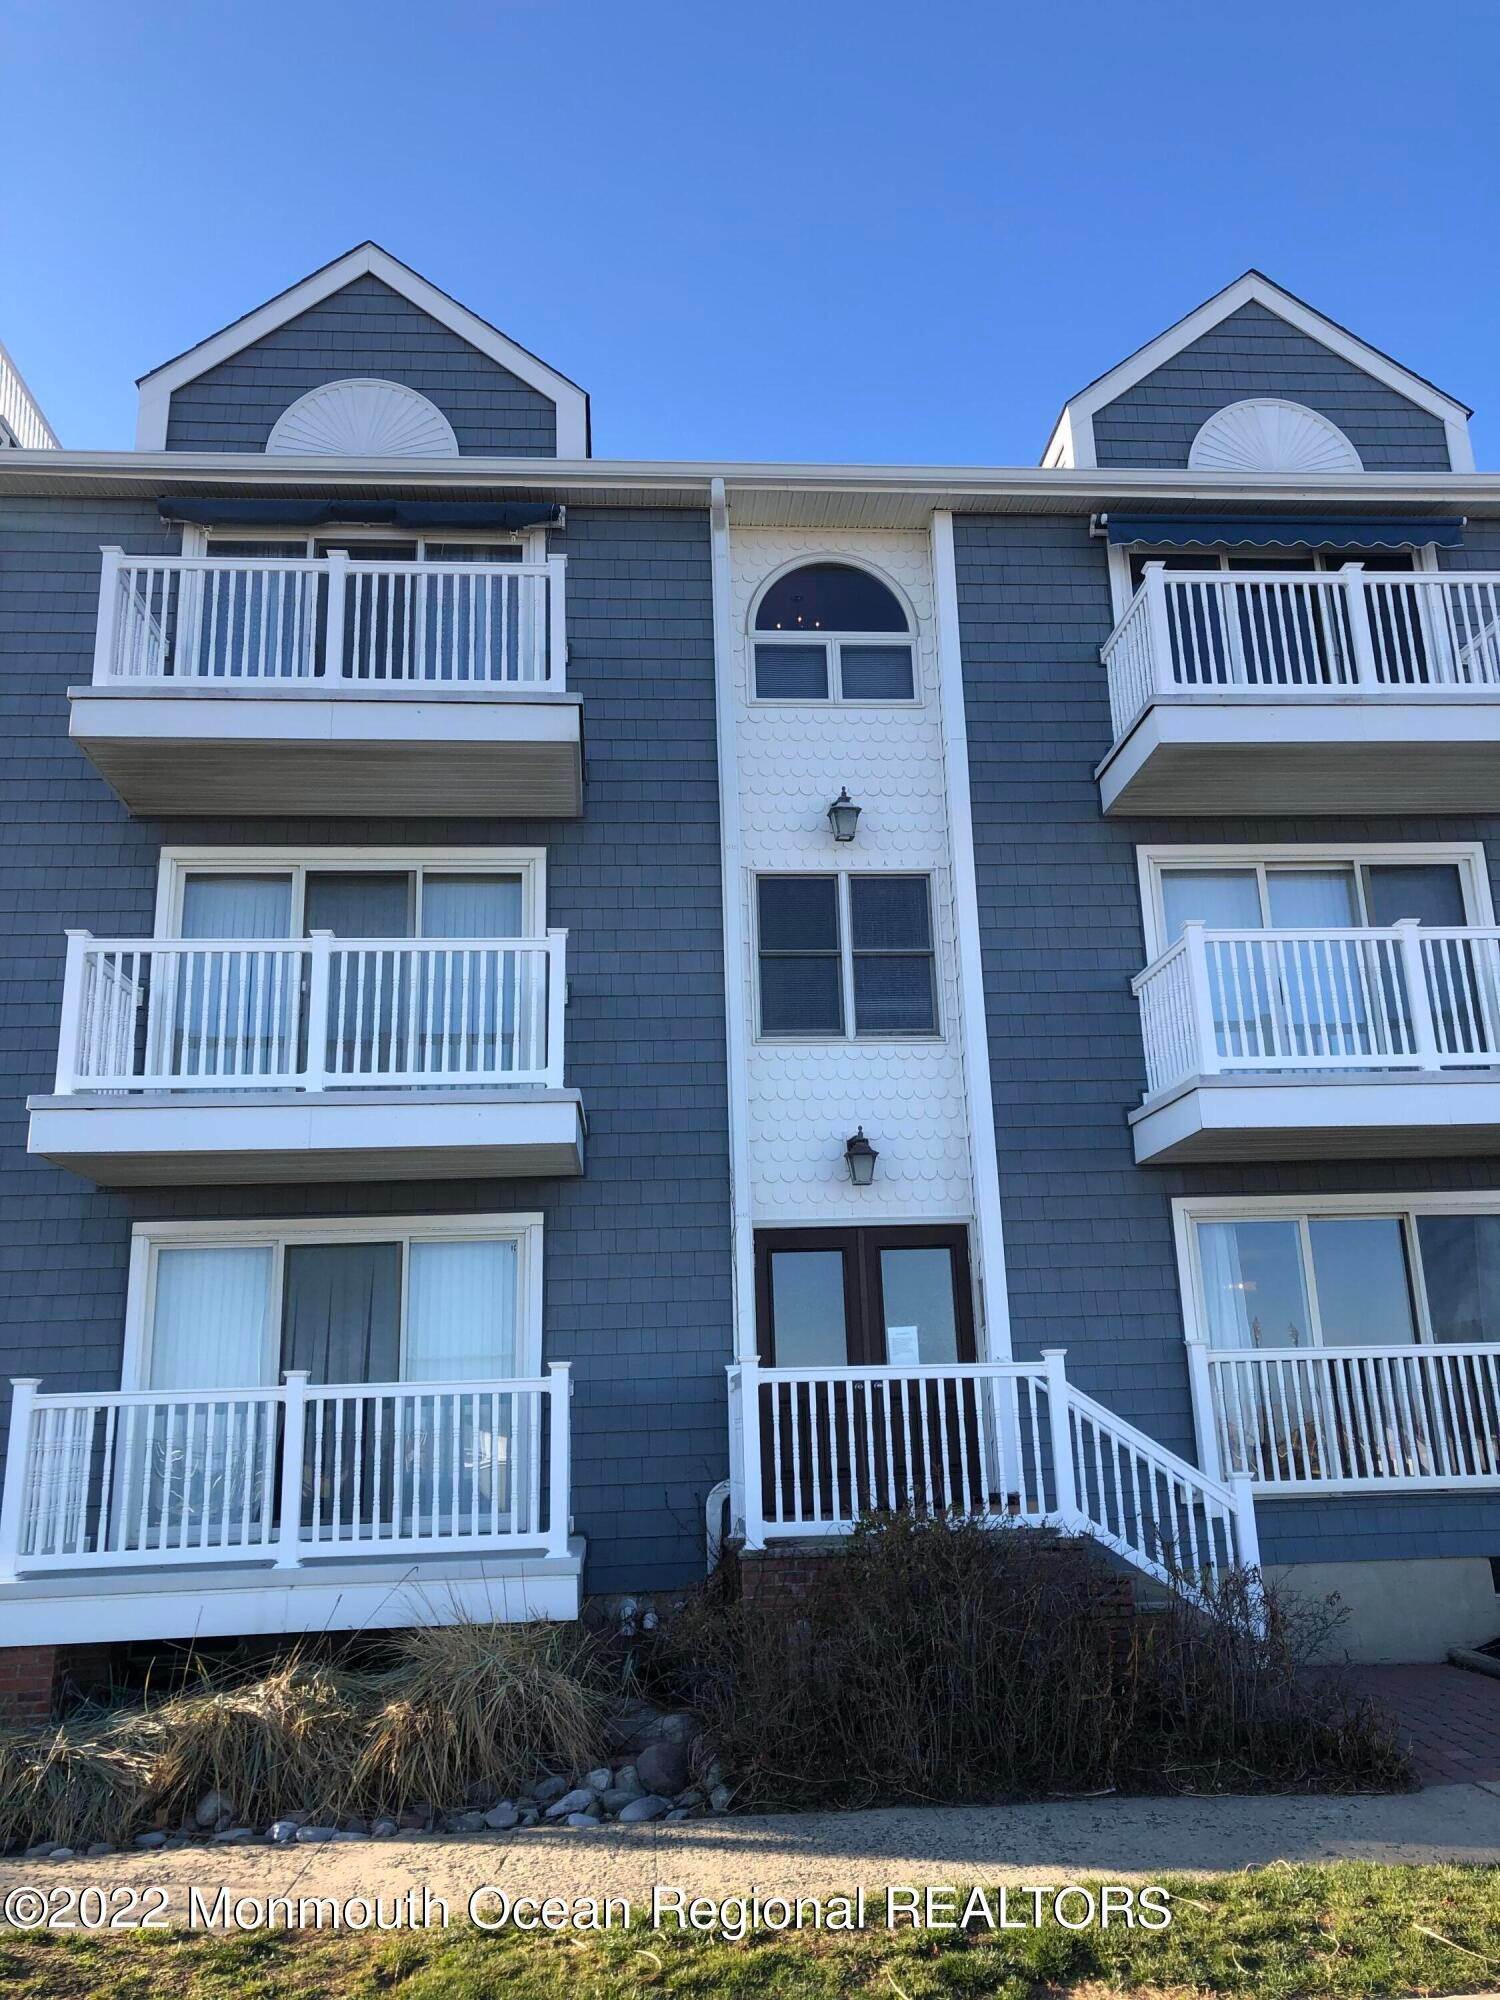 Property for Sale at 1201 Ocean Avenue 1C Bradley Beach, New Jersey 07720 United States